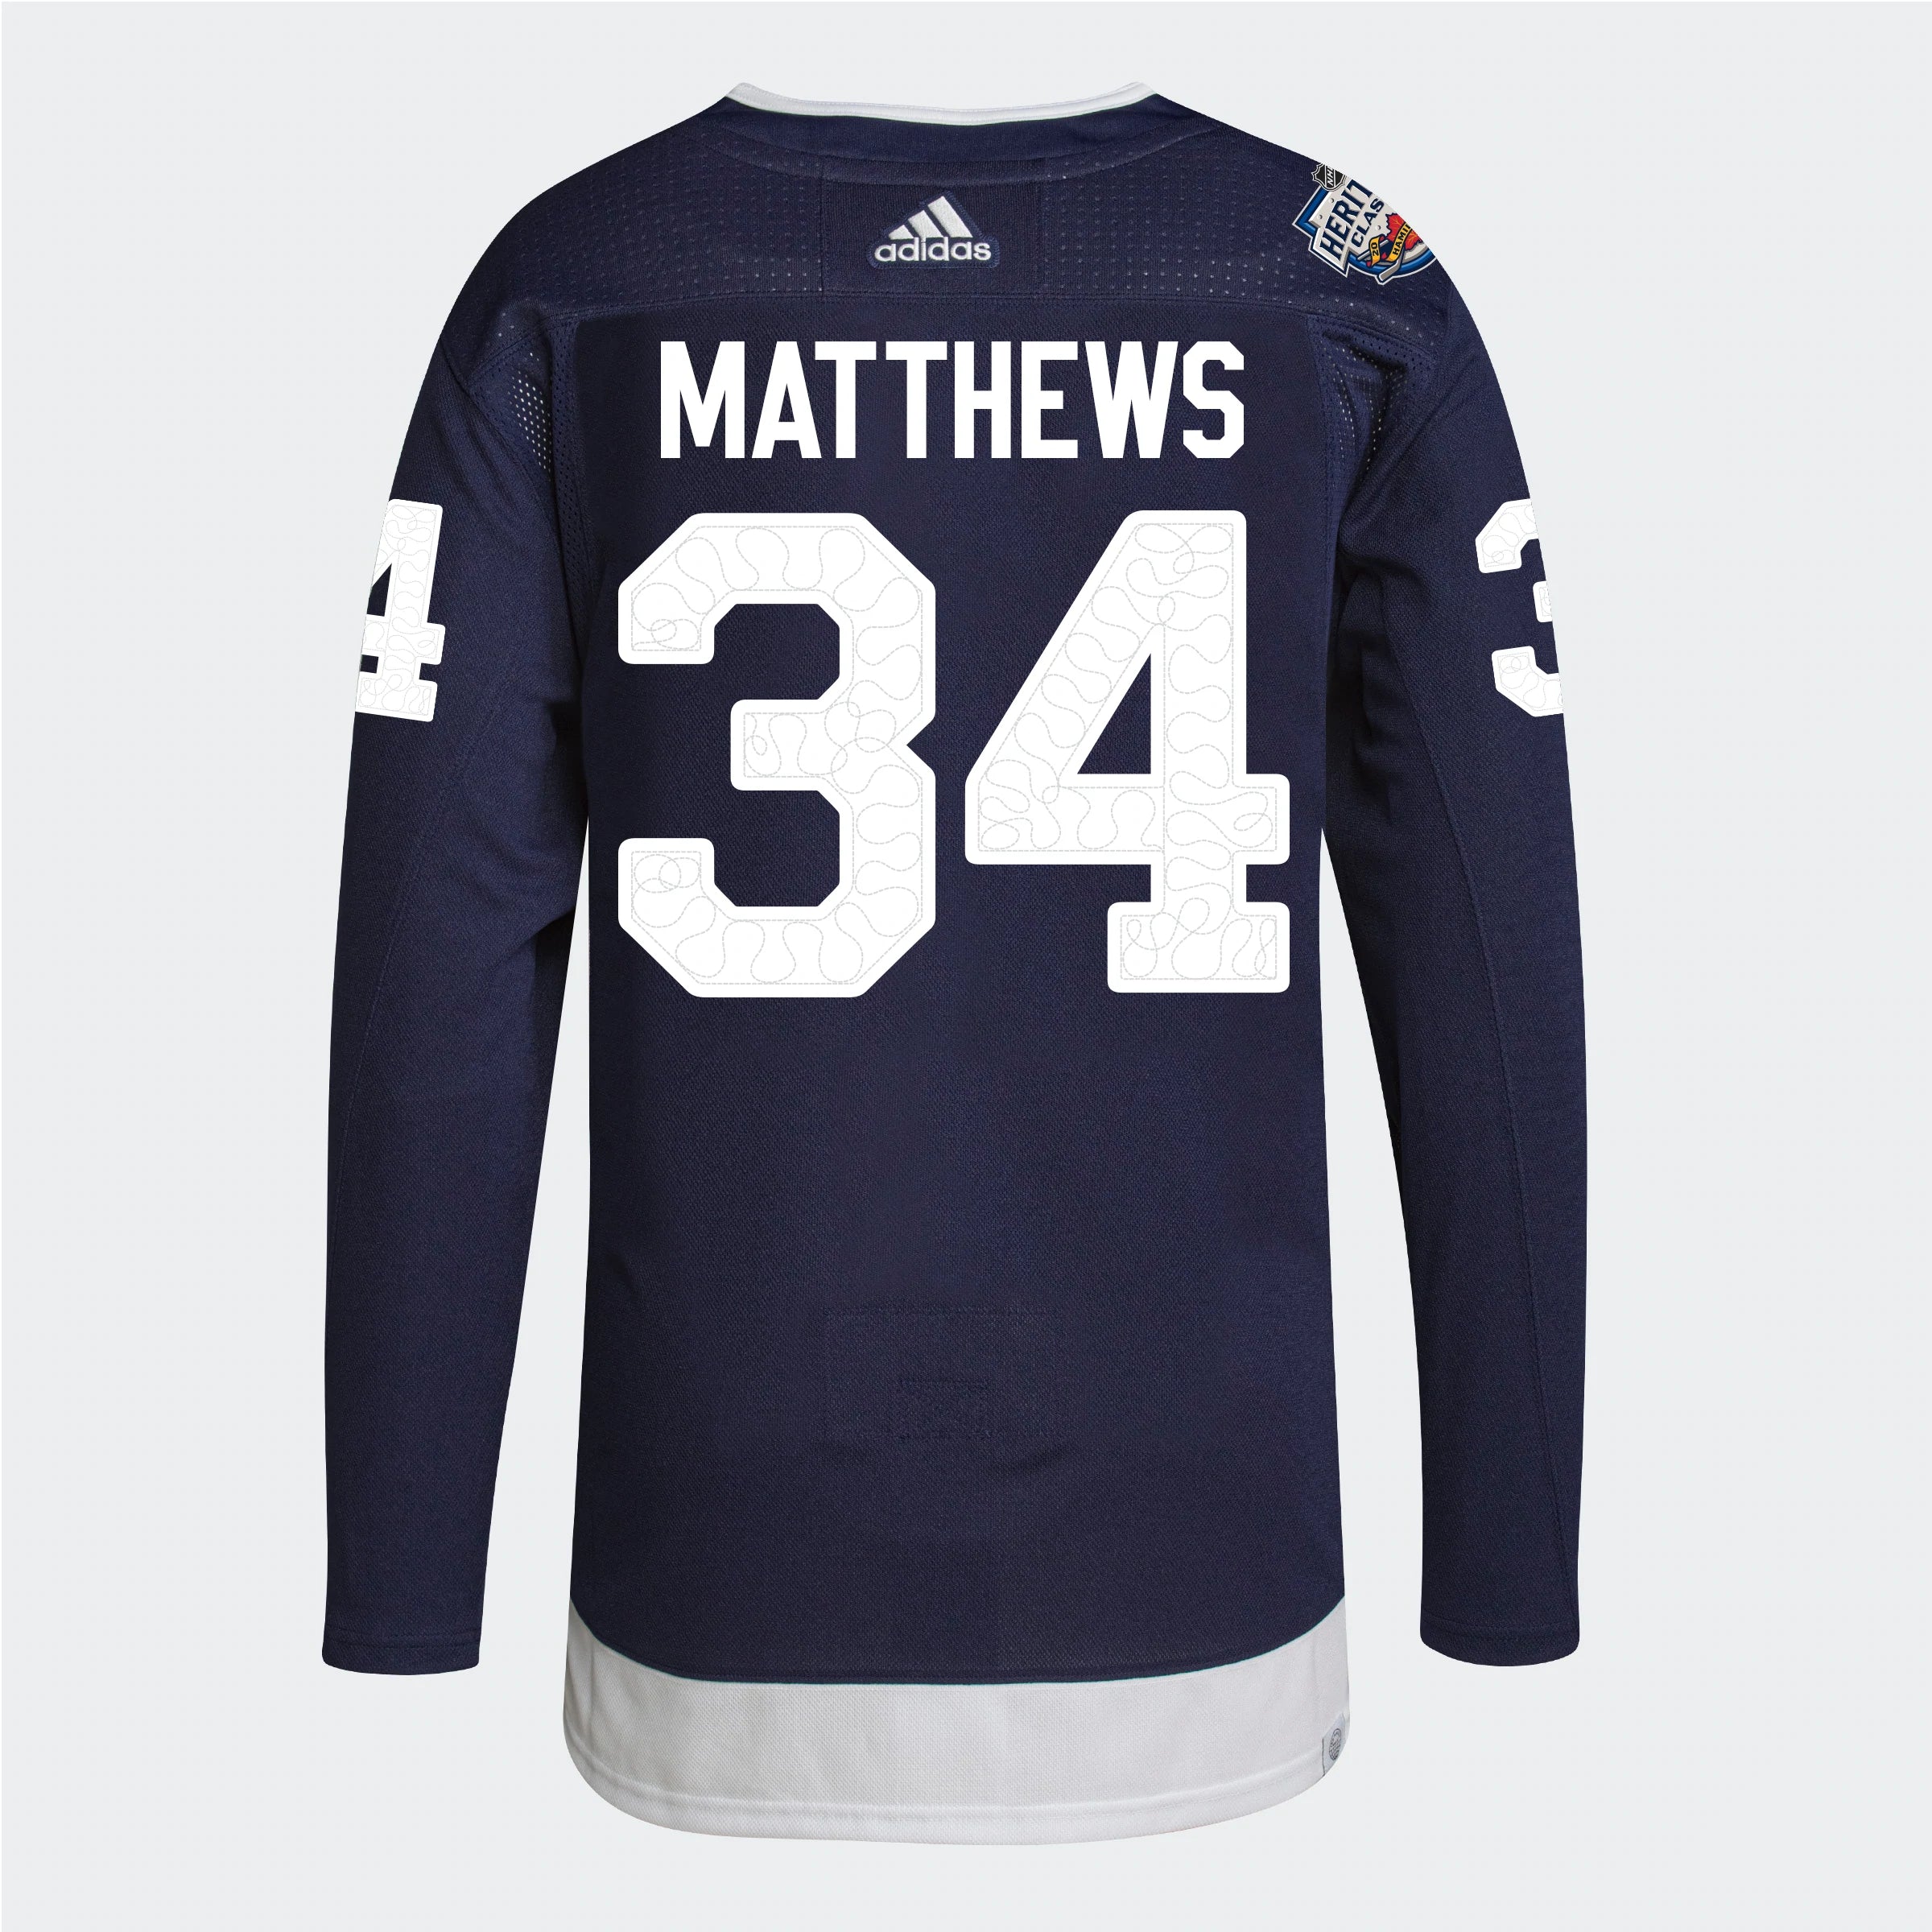 Matthews Heritage Classic Youth Jersey T